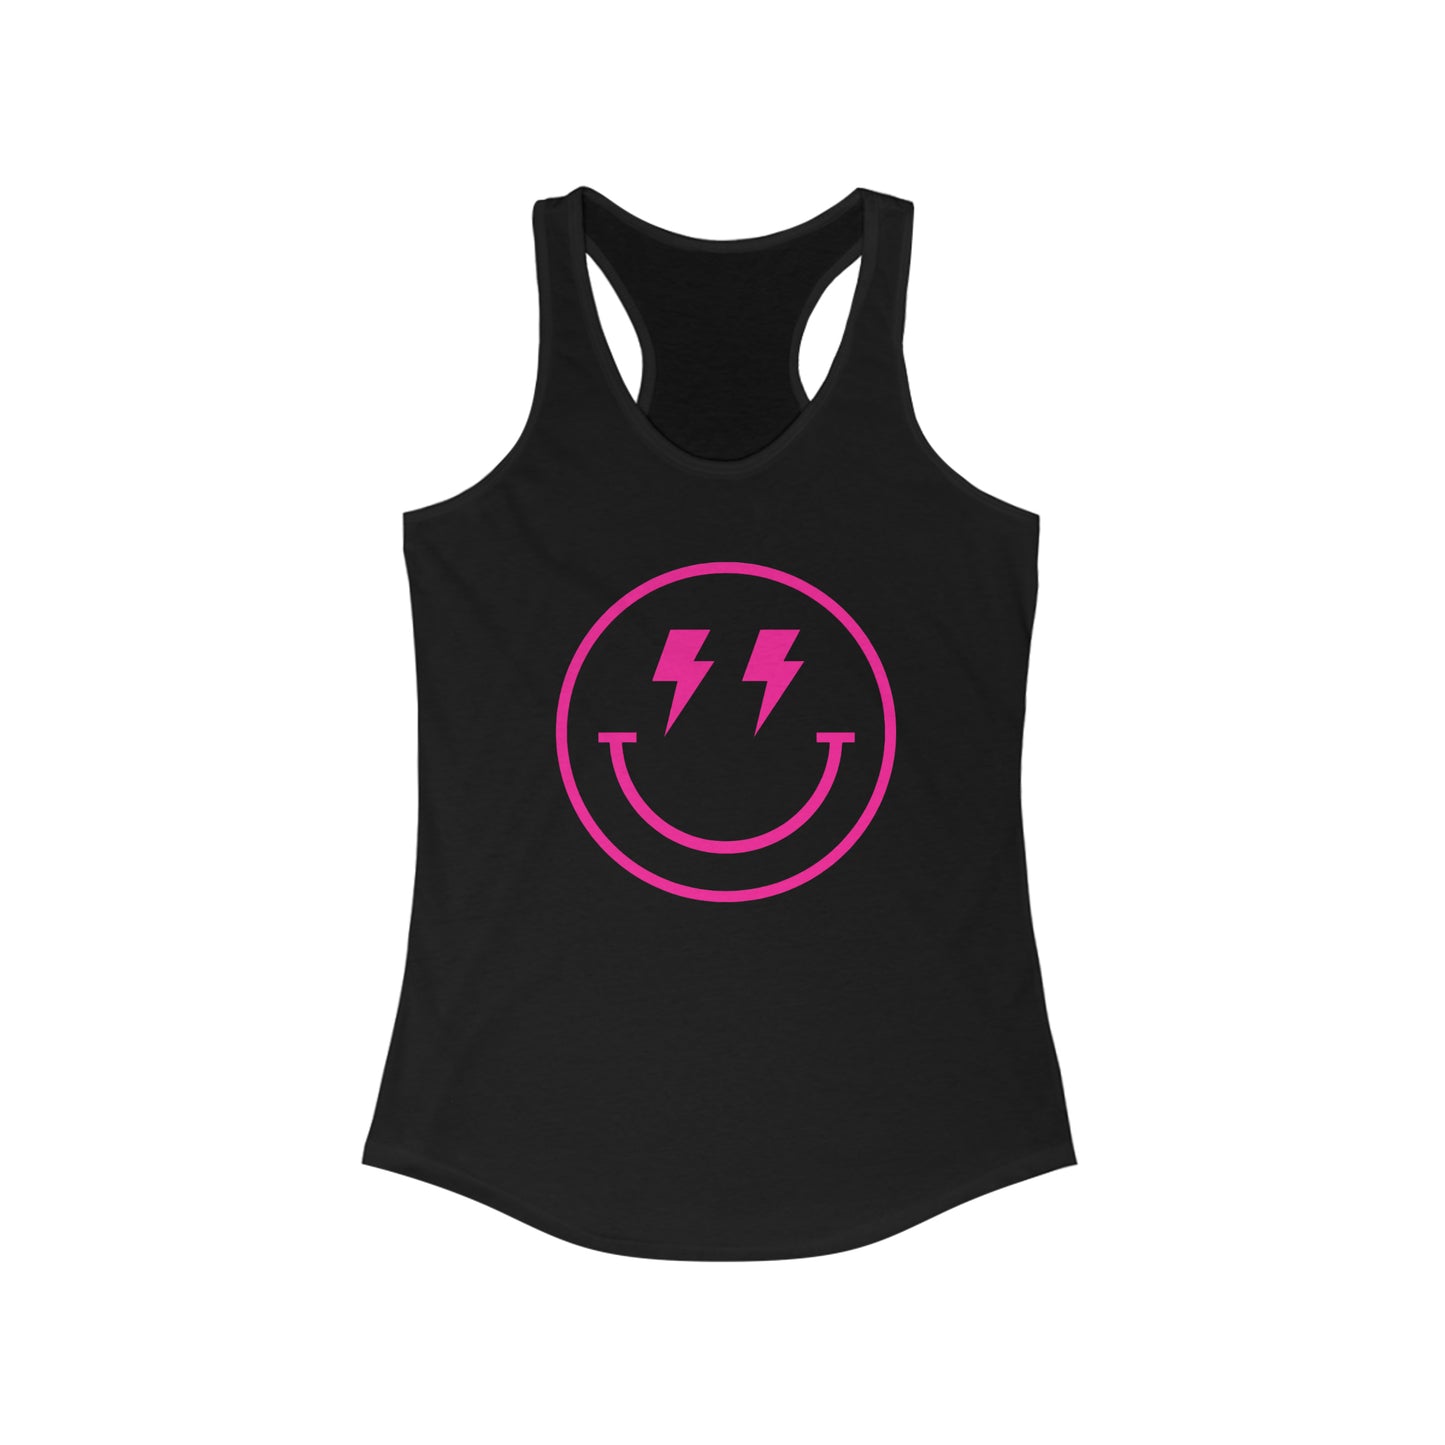 Chic Racerback Tank Top with High-Quality Print: Lightweight, Comfy, and Stylish | Ideal for Active Lifestyles